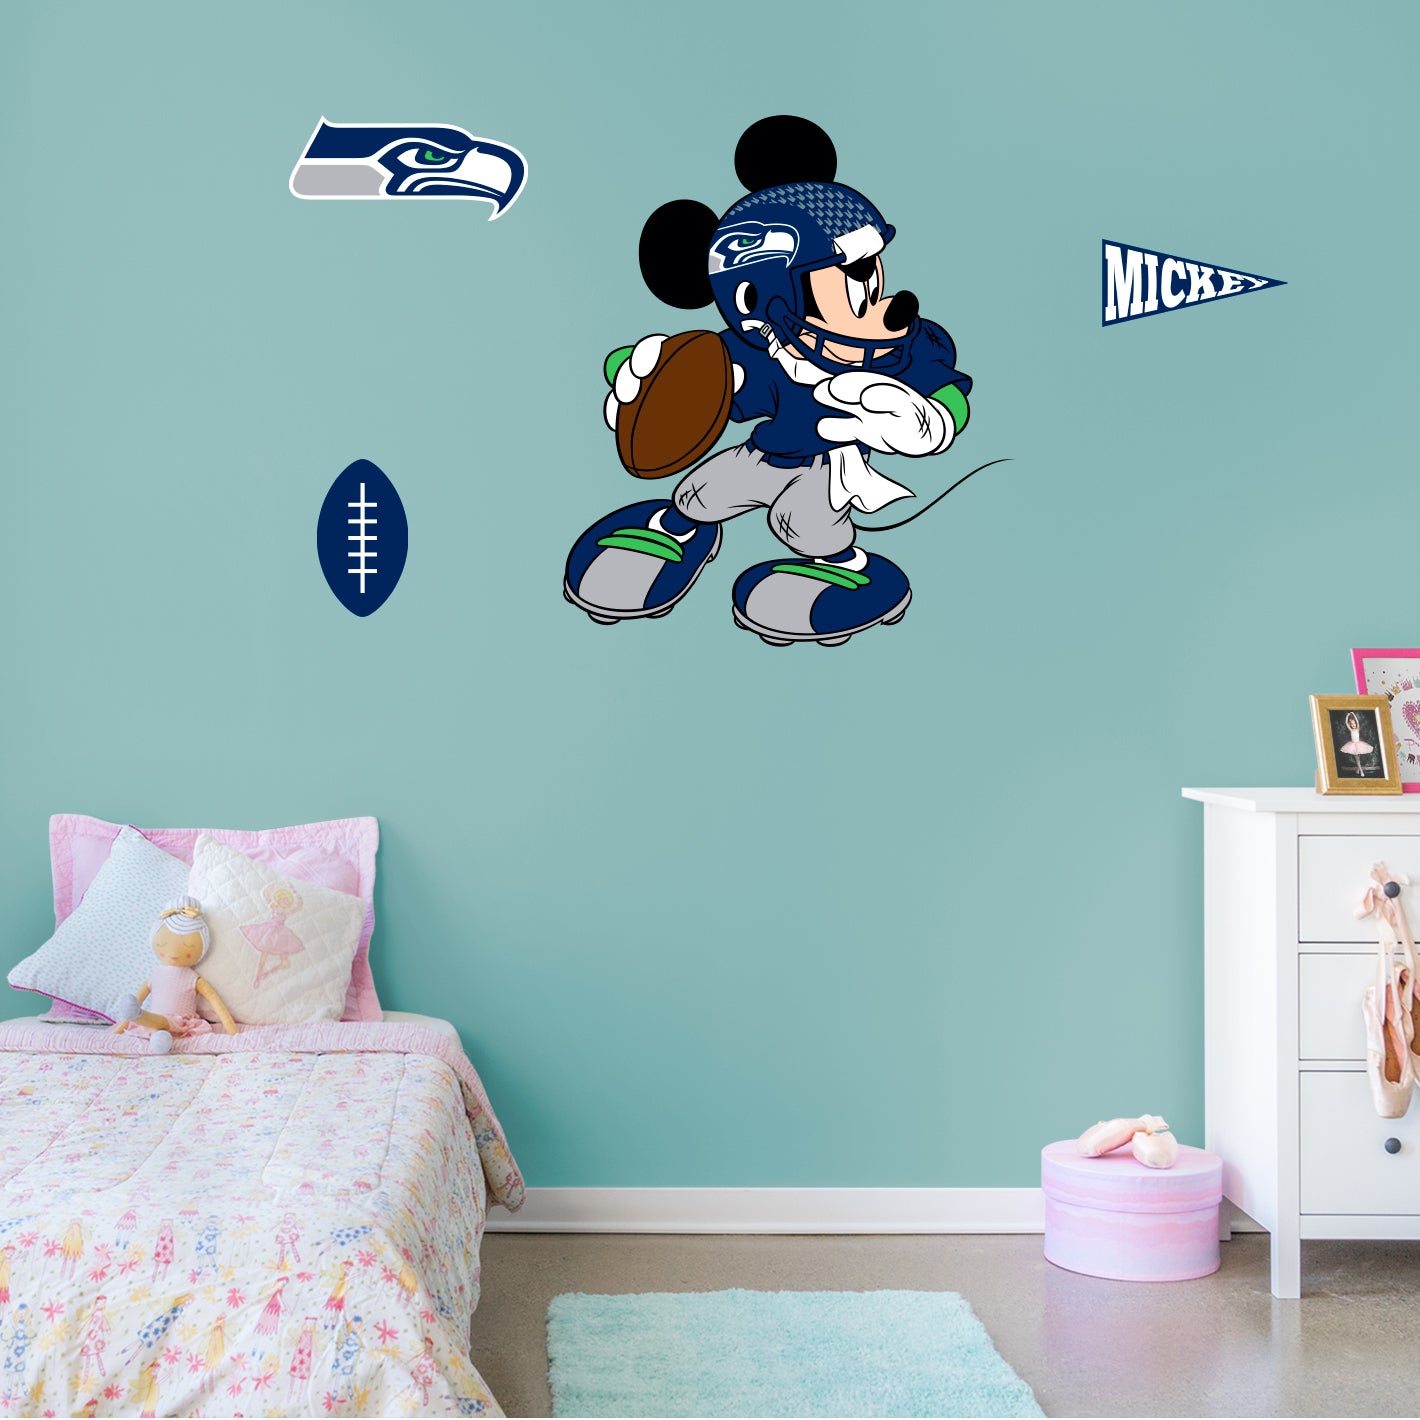 Seattle Seahawks: Mickey Mouse - Officially Licensed NFL Removable Adhesive Decal